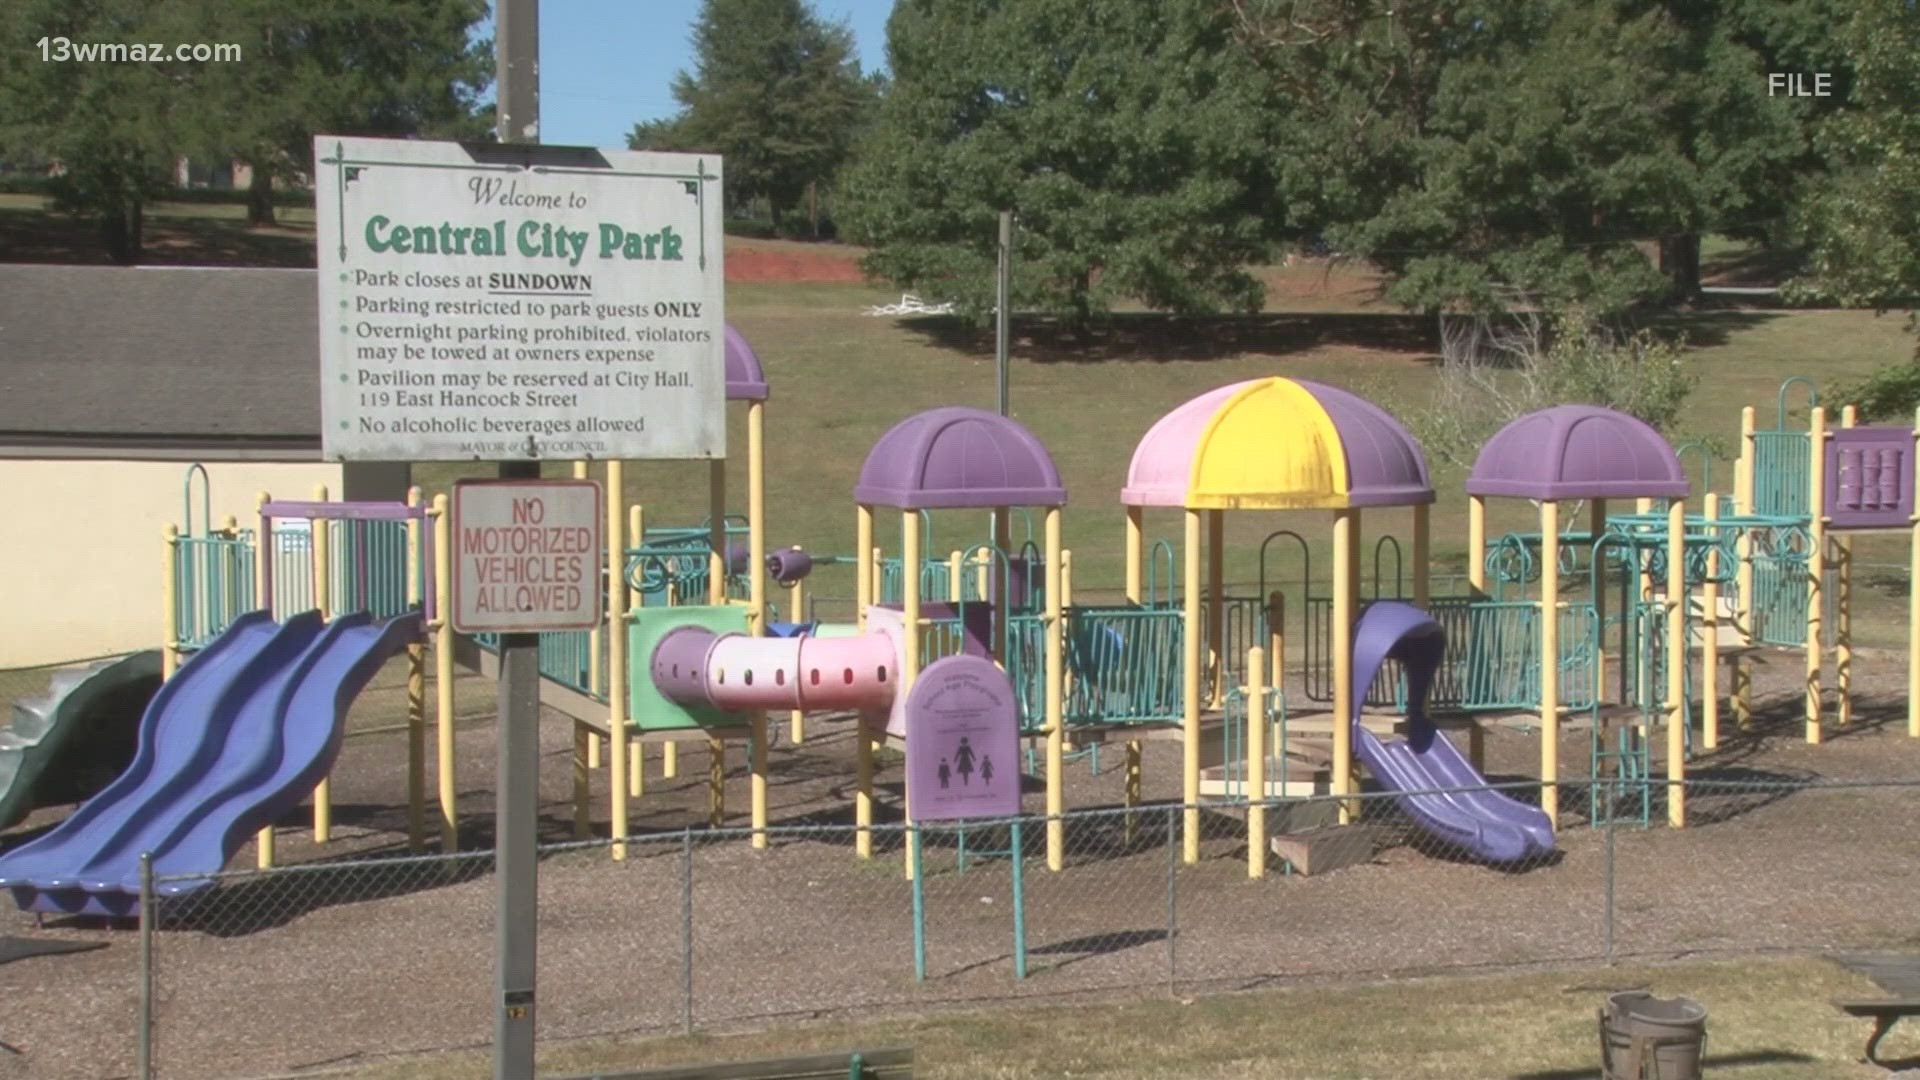 City Councilman Walter Reynolds says the playground equipment at Central City Park was last replaced when he was in middle school in the 90s